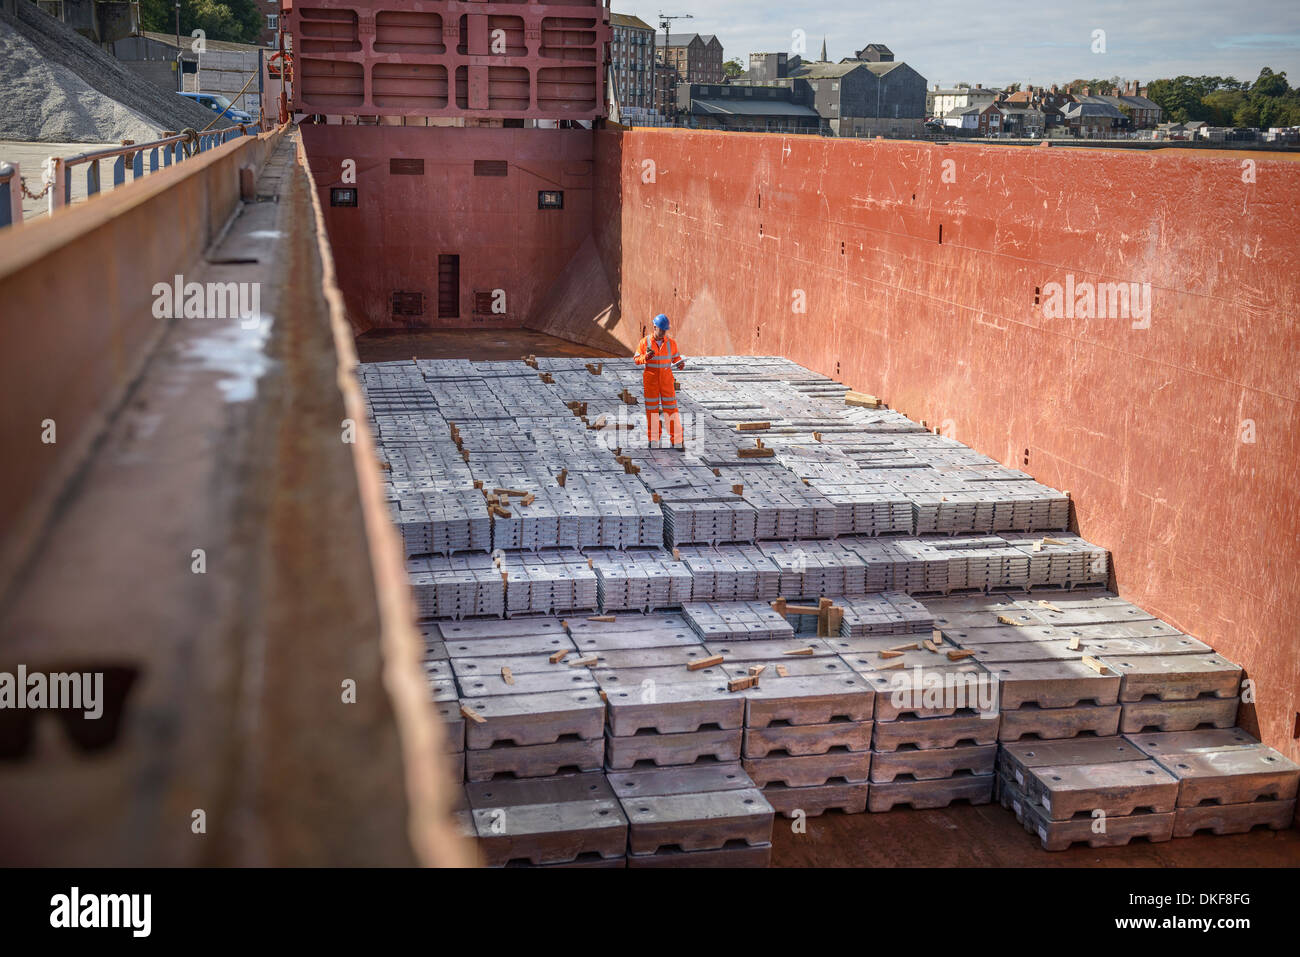 Worker standing on metal ingots in ship's hold Stock Photo